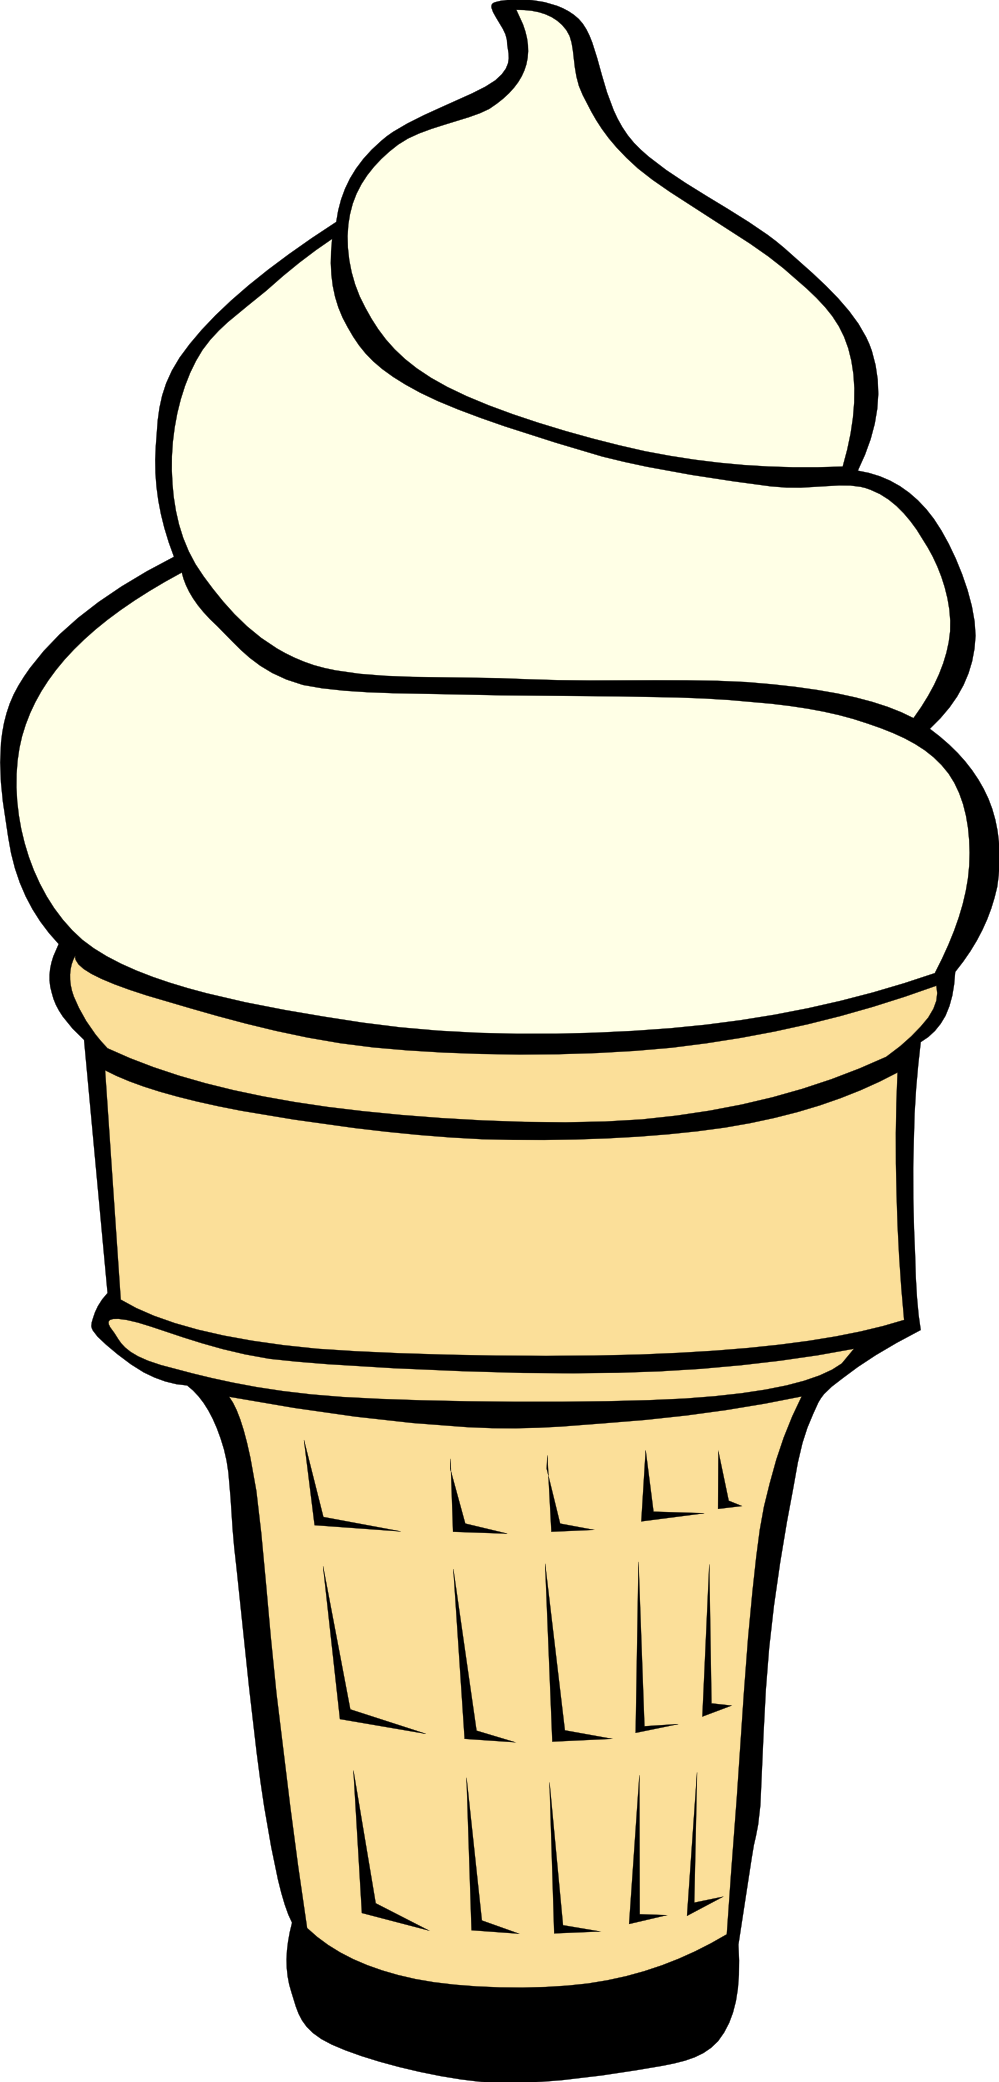 Ice Cream In Cone Drawing Free Image